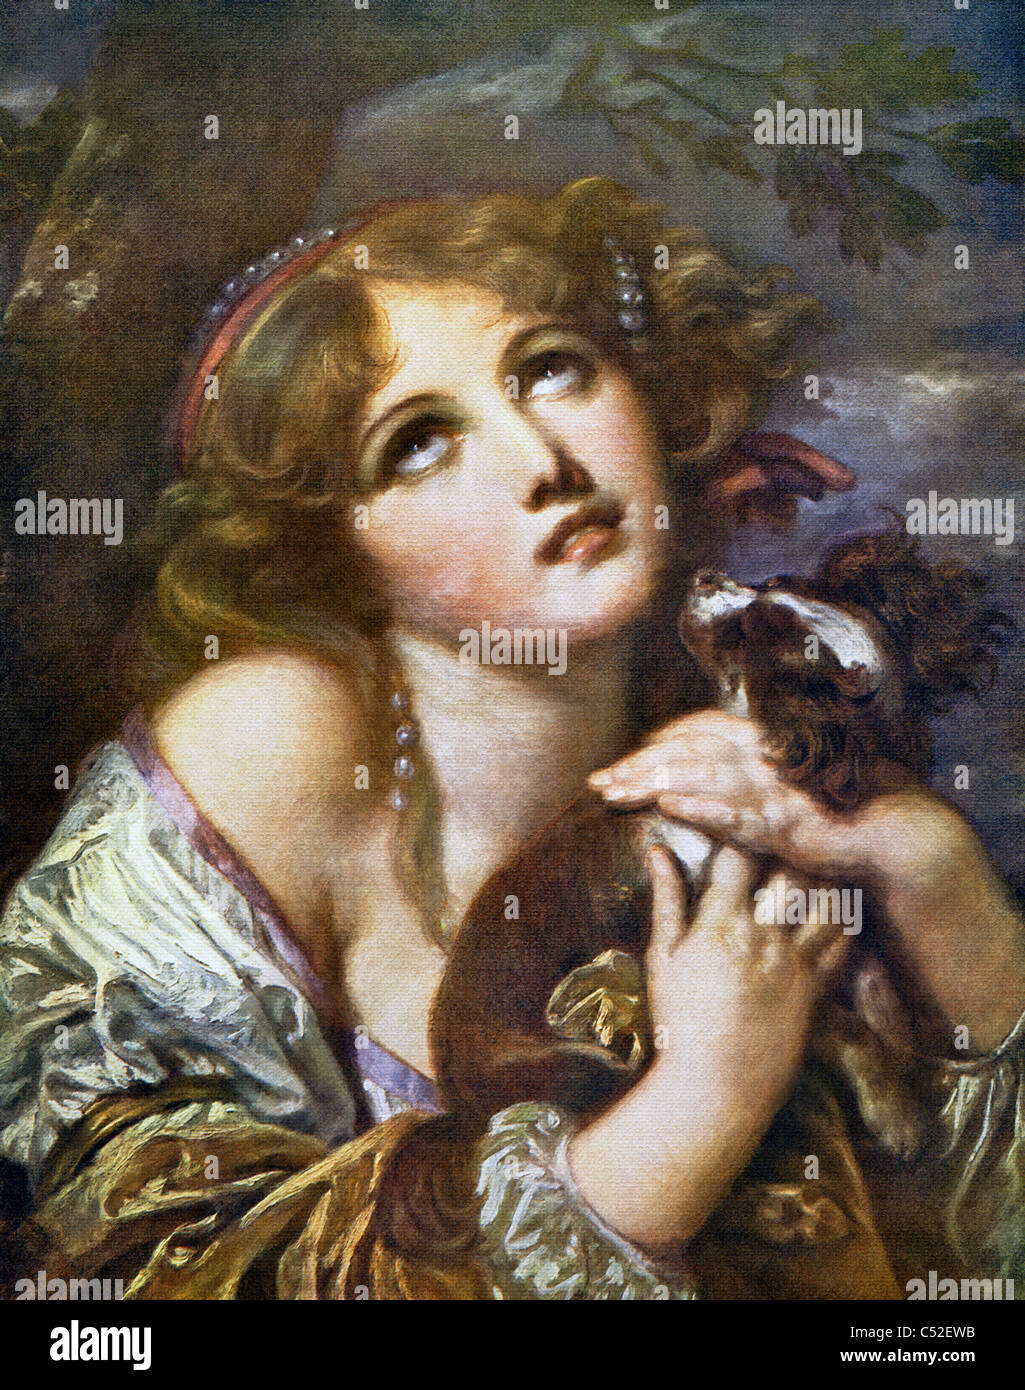 The painting byy Jean Baptiste Greuze, titled Fidelity,  is now part of the Wallace Collection in London, England. Stock Photo